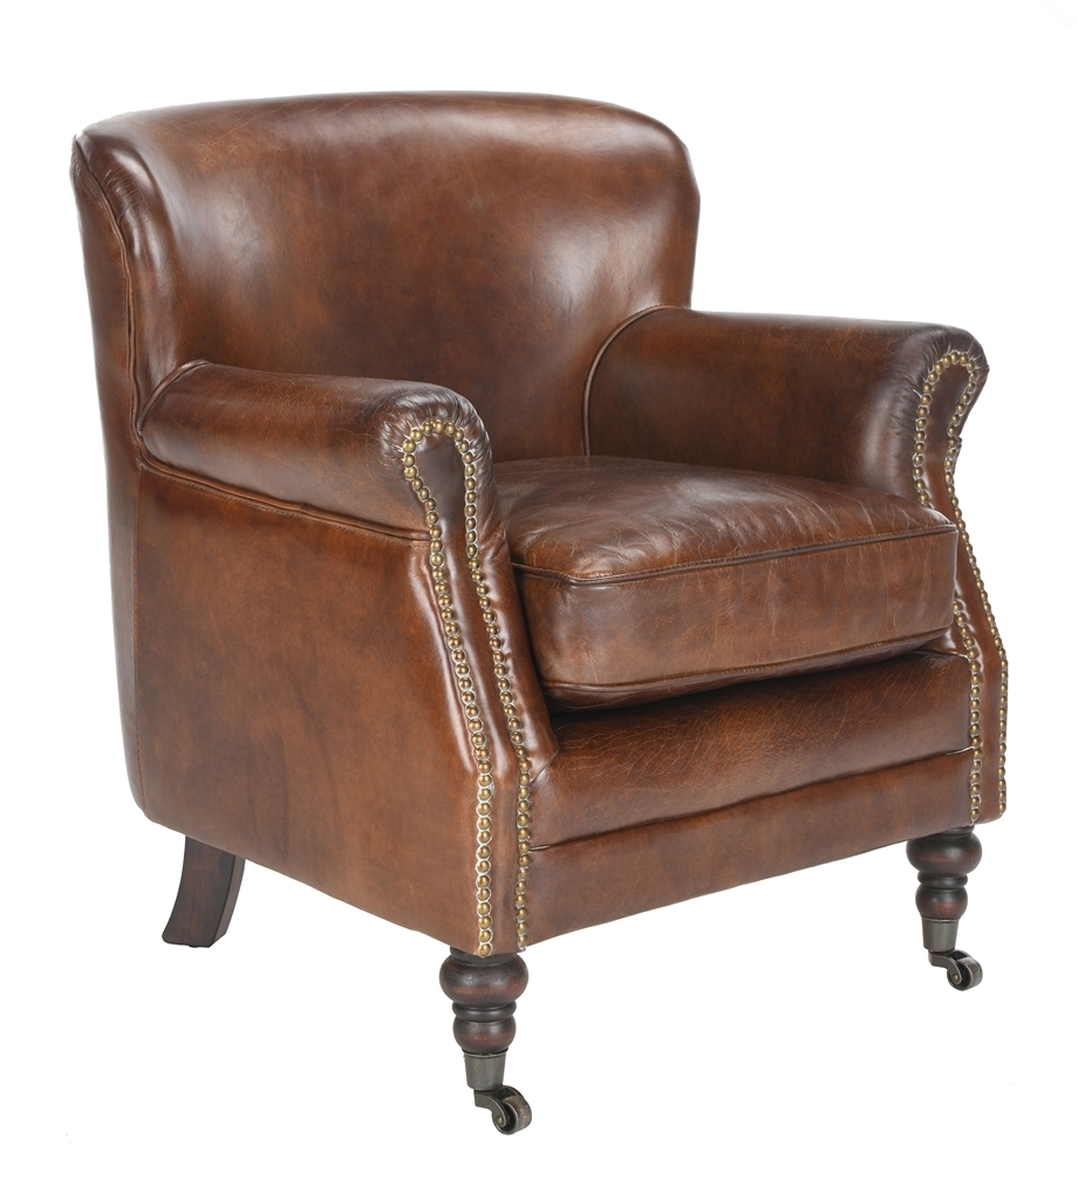 Manchester Leather Arm Chair - Vintage Cigar Brown - Arlo Home - Image 3